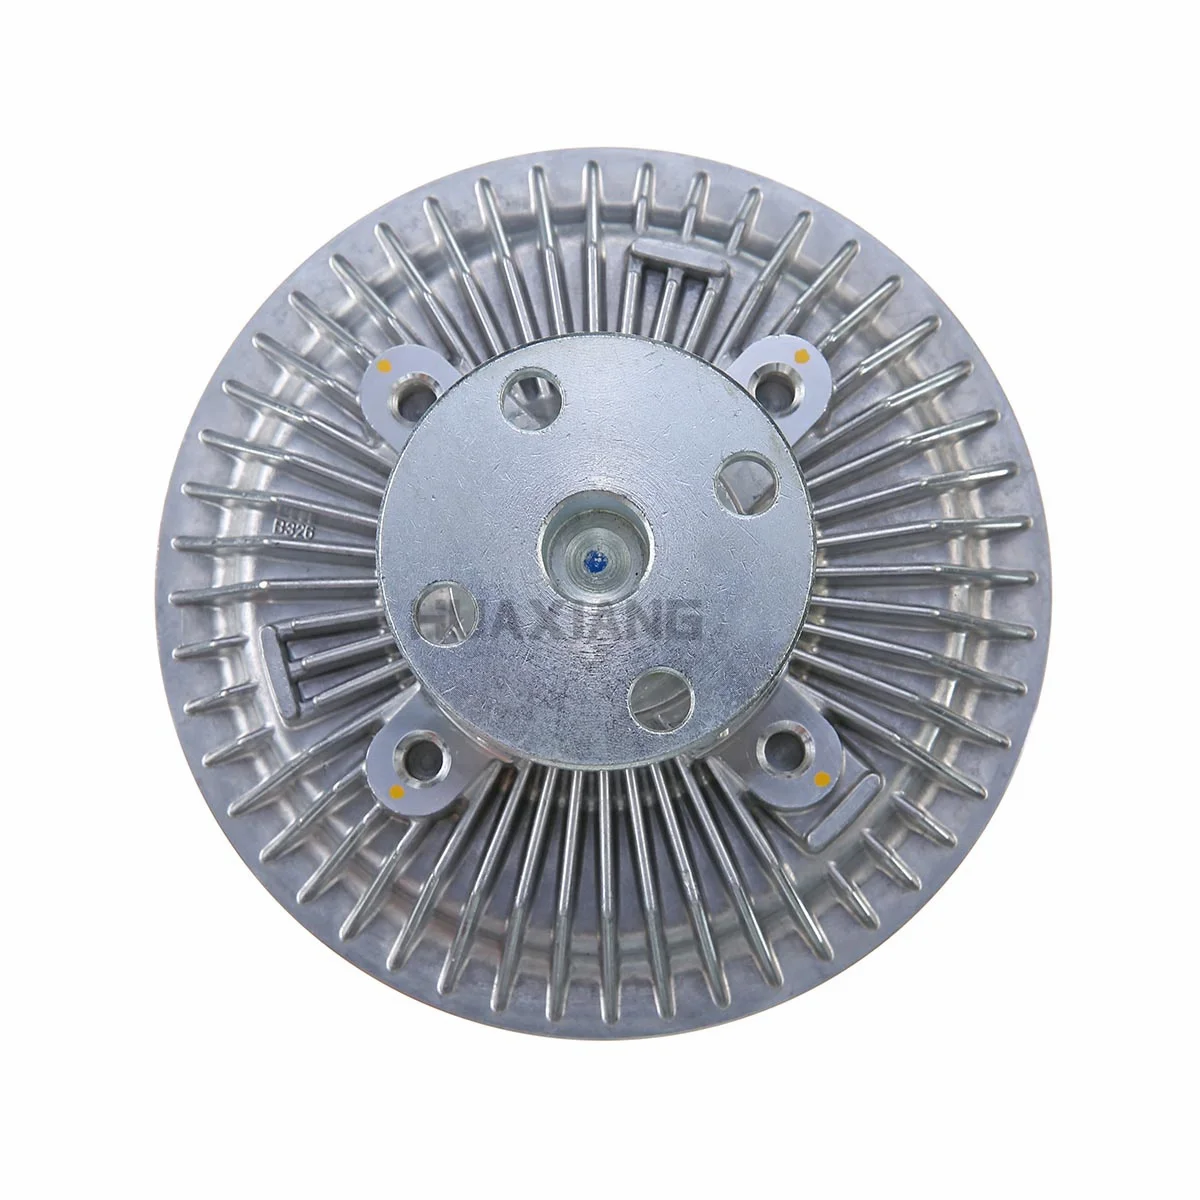 Cooling Fan Clutch for Jeep Cherokee 1987-2001 Wrangler Comanche Wagoneer 